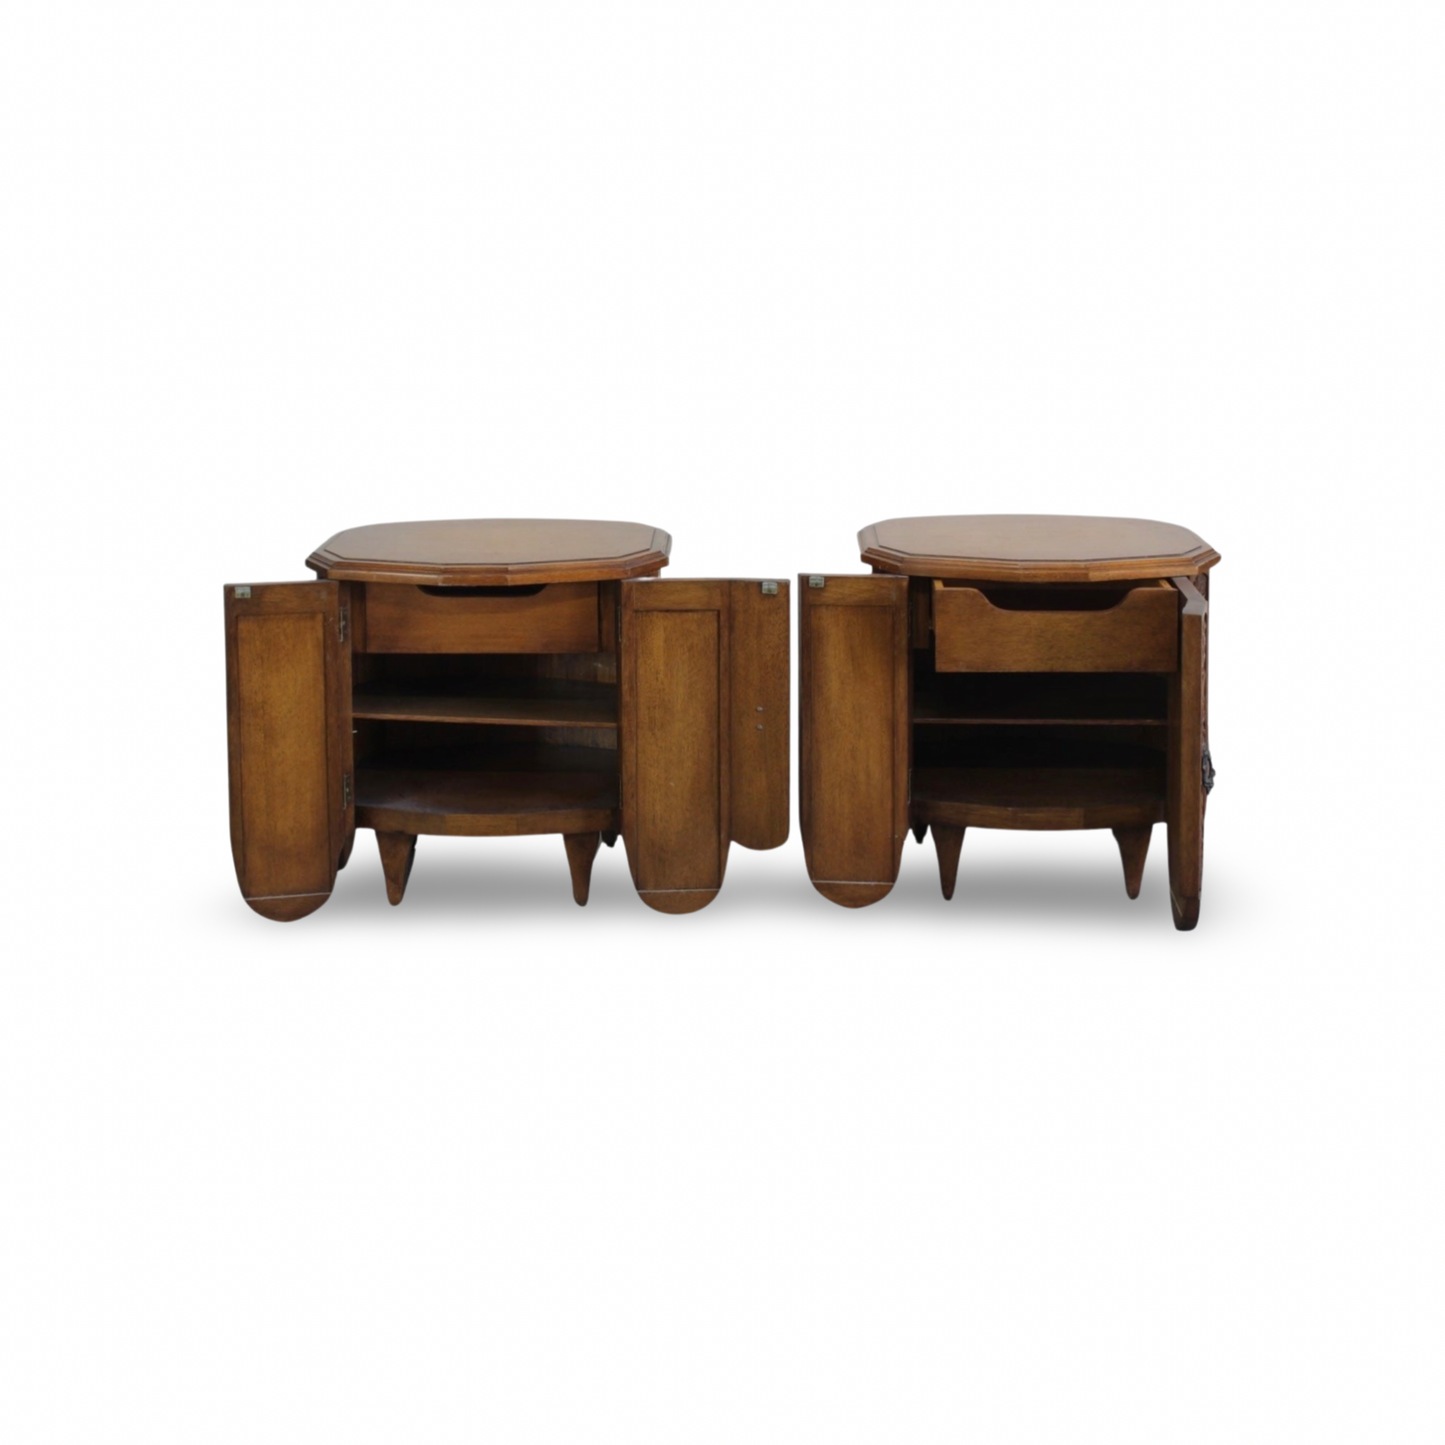 Freed Waran Granada Collection Mid Century Spanish Revival Vintage Pair of Nightstands c. 1960s